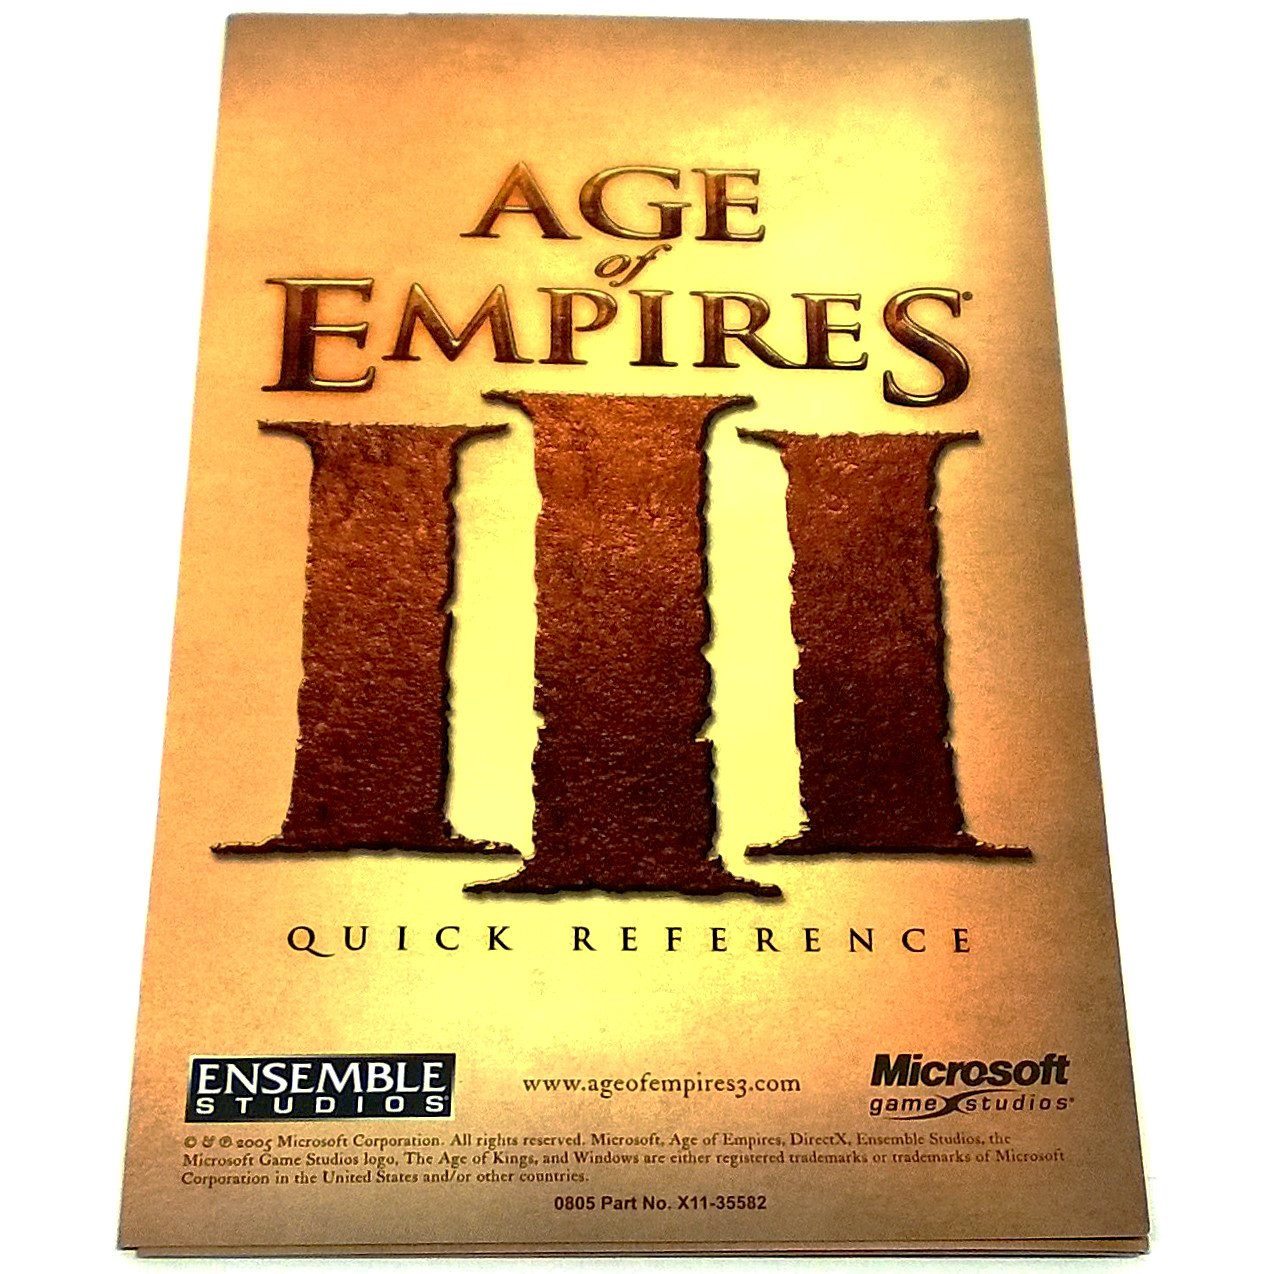 Age of Empires III for PC CD-ROM - Front of reference card